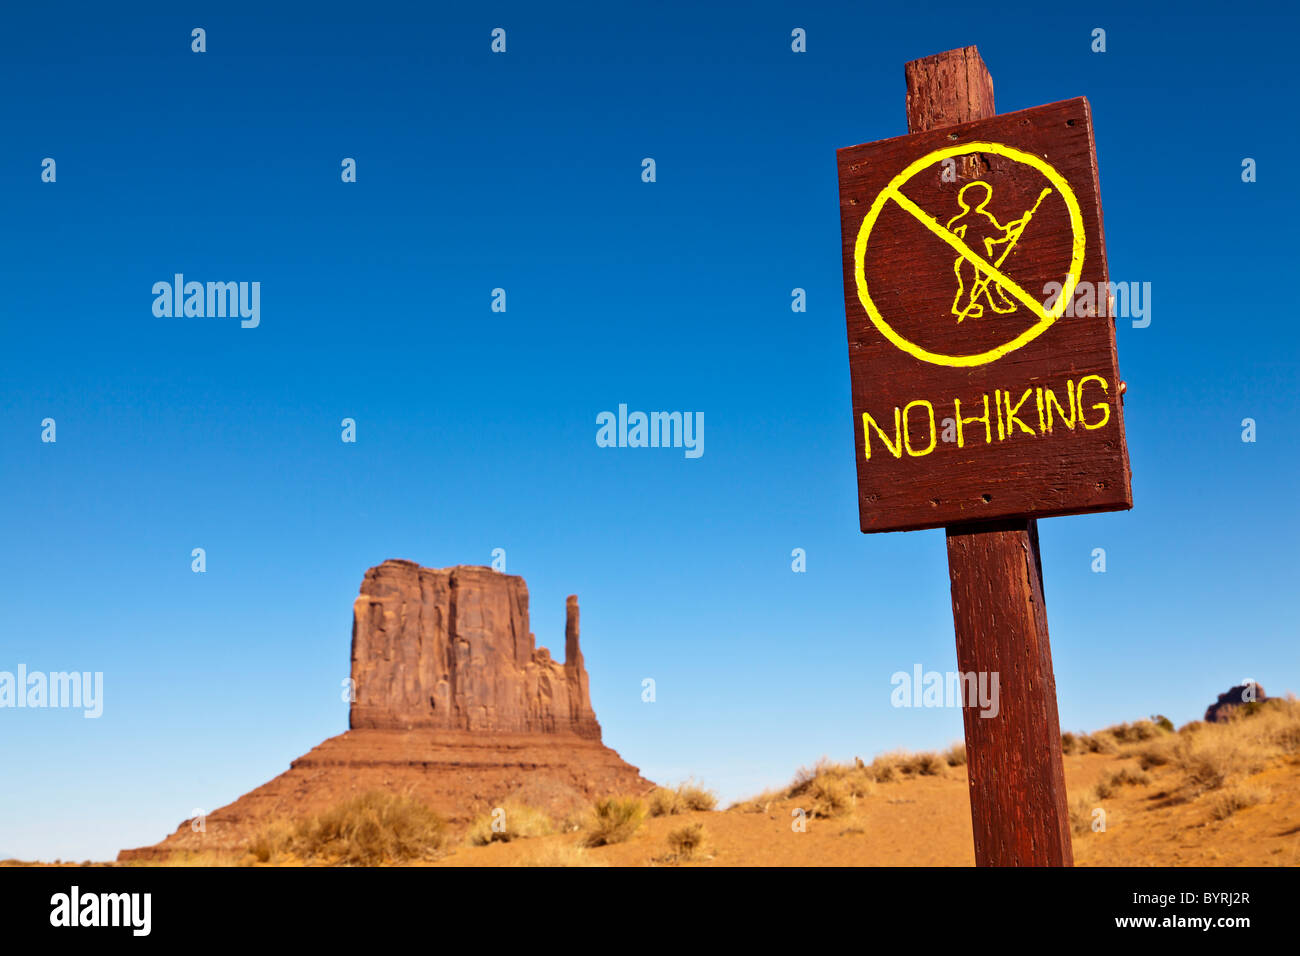 no-hiking-sign-in-the-desert-stock-photo-alamy